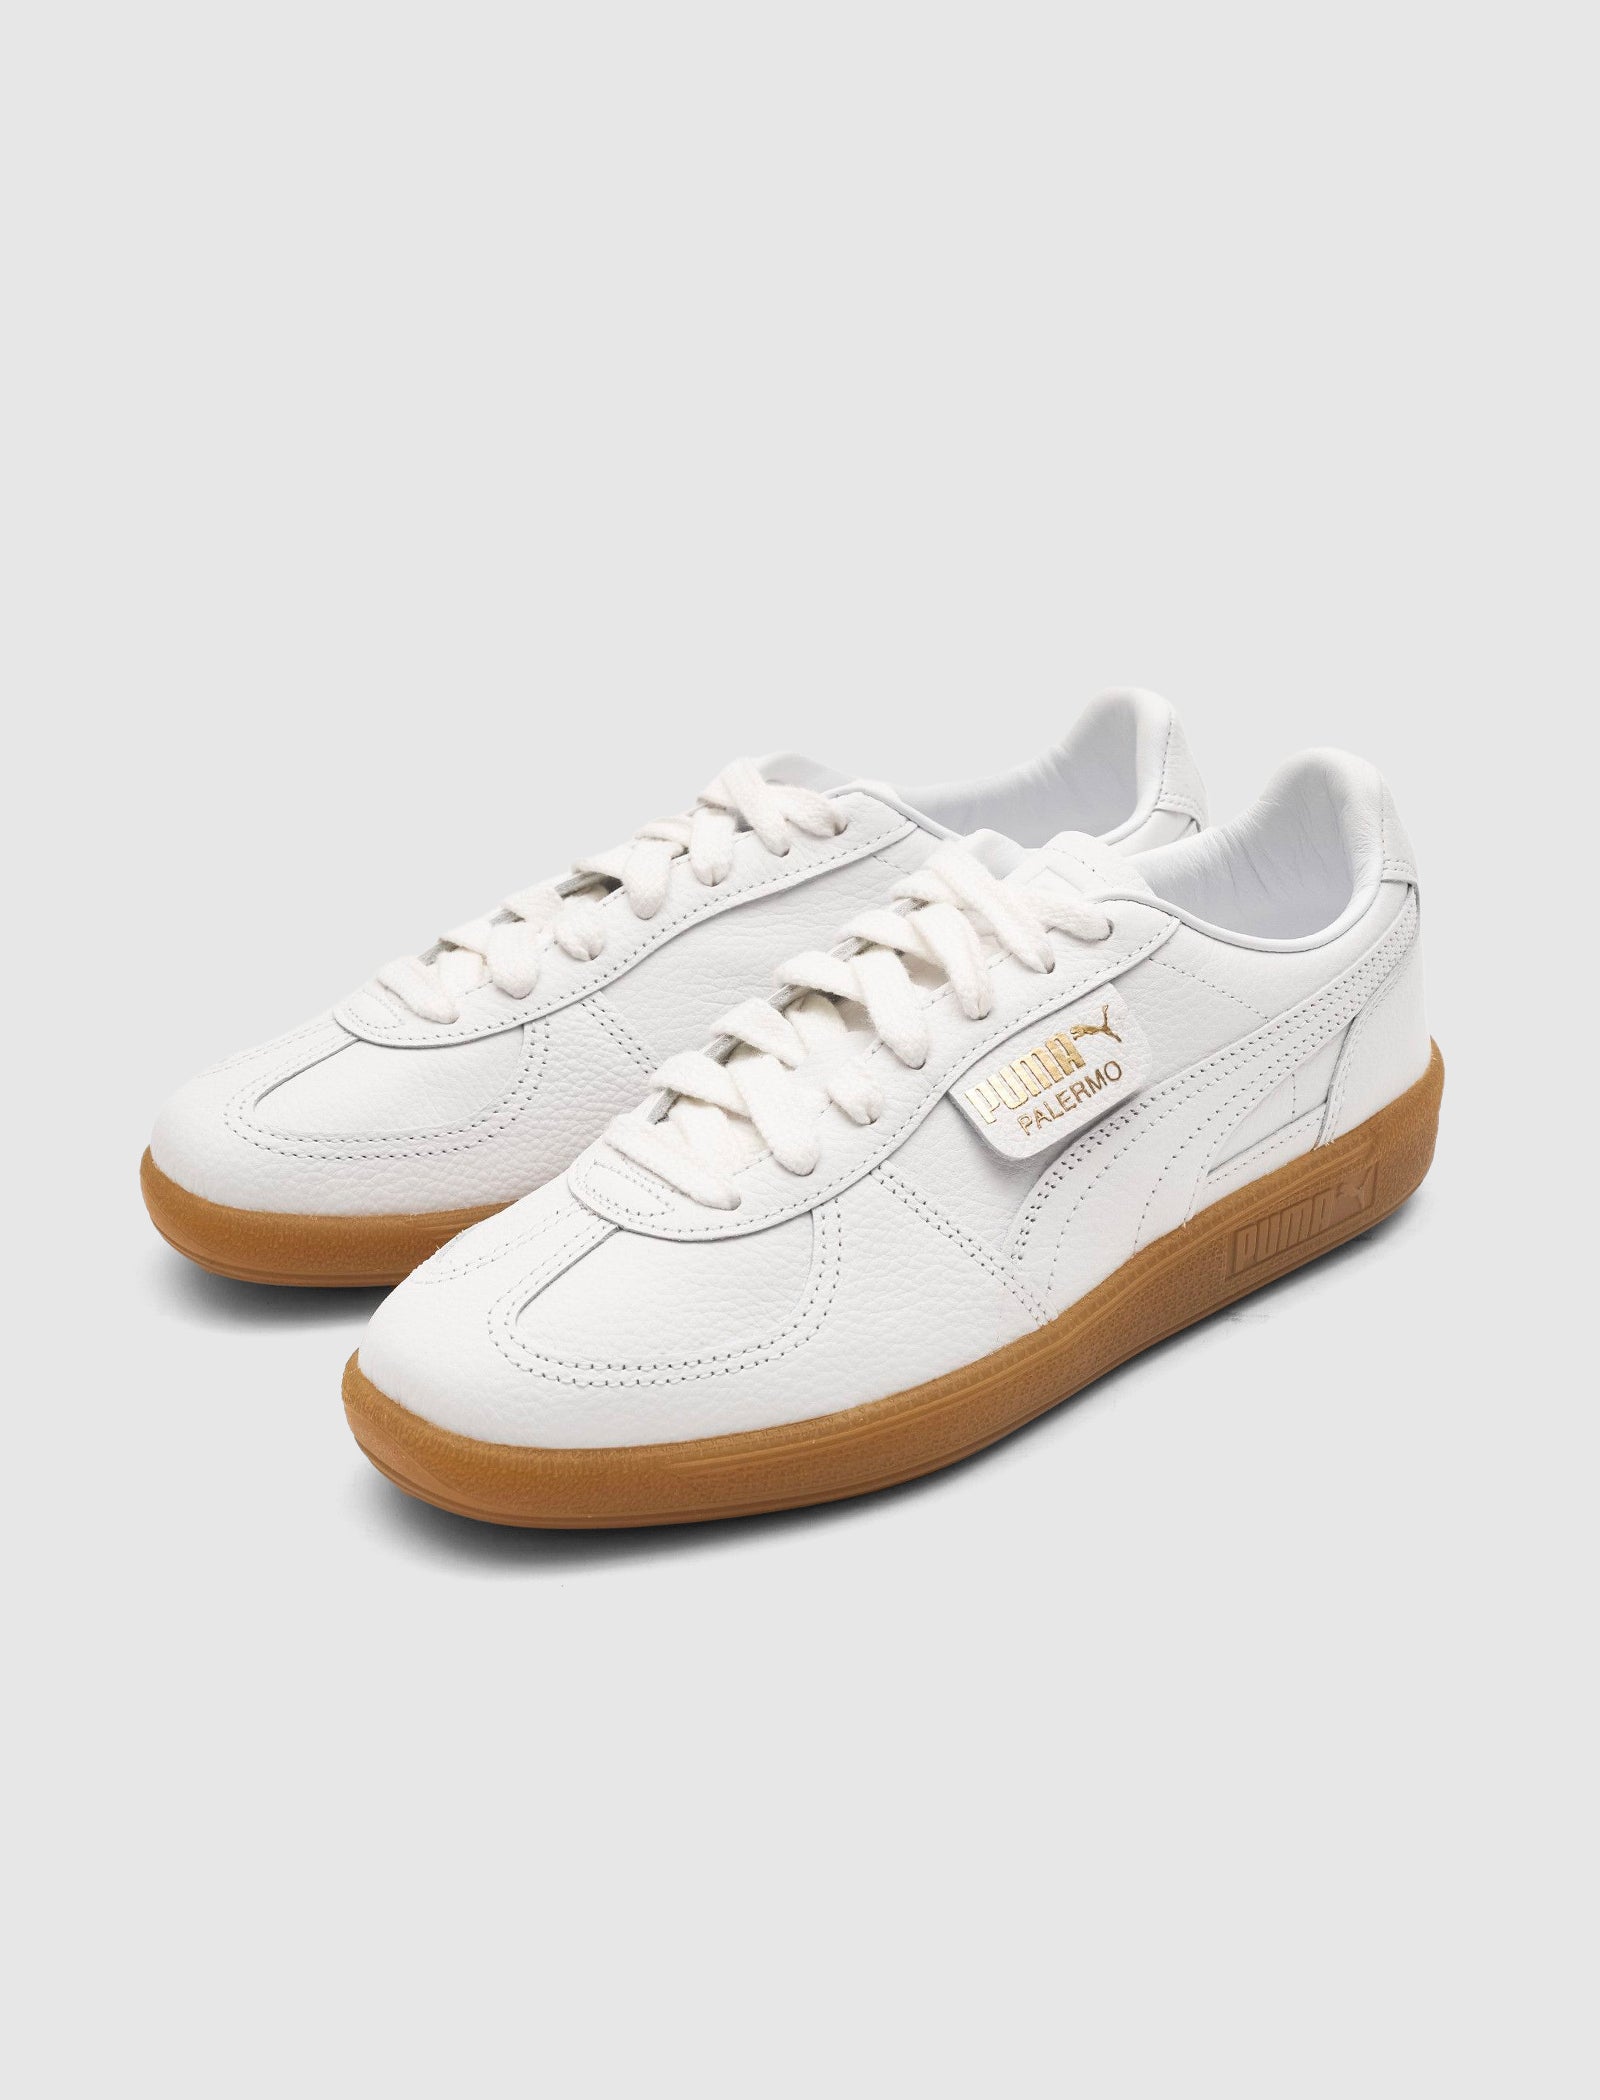 PALERMO PREMIUM "WHITE/FROSTED IVORY"